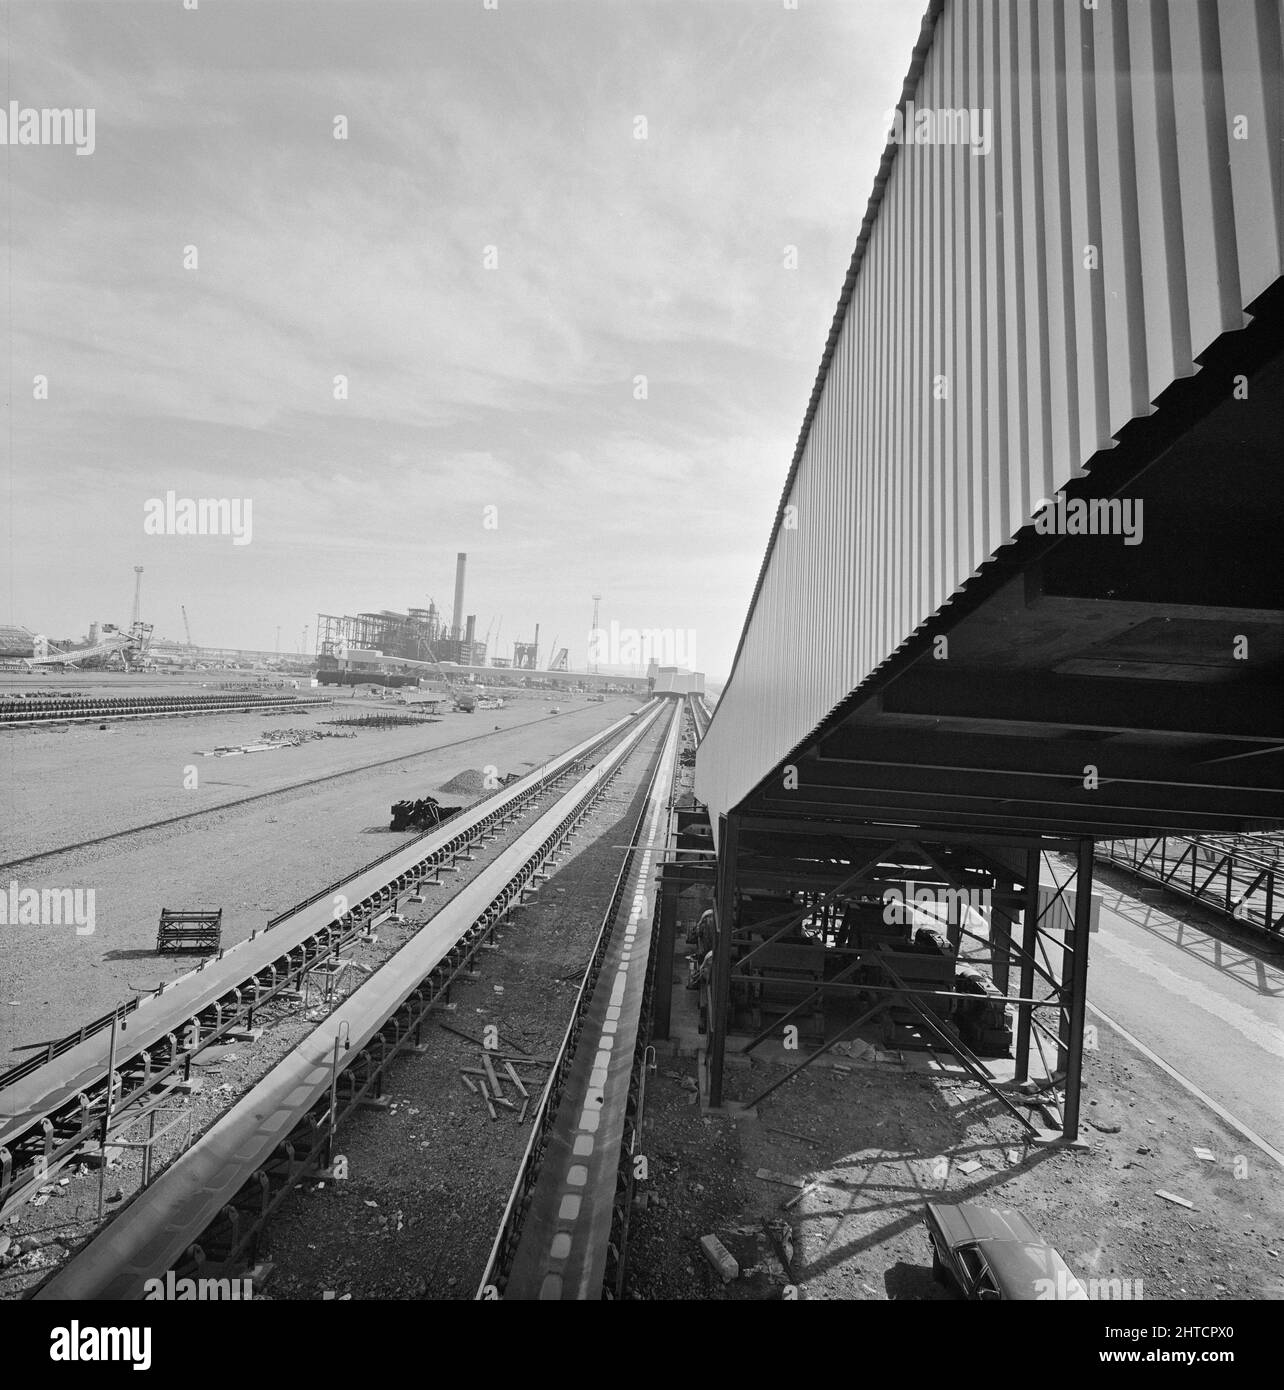 Steel Works, Redcar and Cleveland, North Yorkshire, 16/09/1975. A view along one of the sets of conveyor belts at the British Steel Works at Redcar, looking south towards the sintering plant. Stock Photo